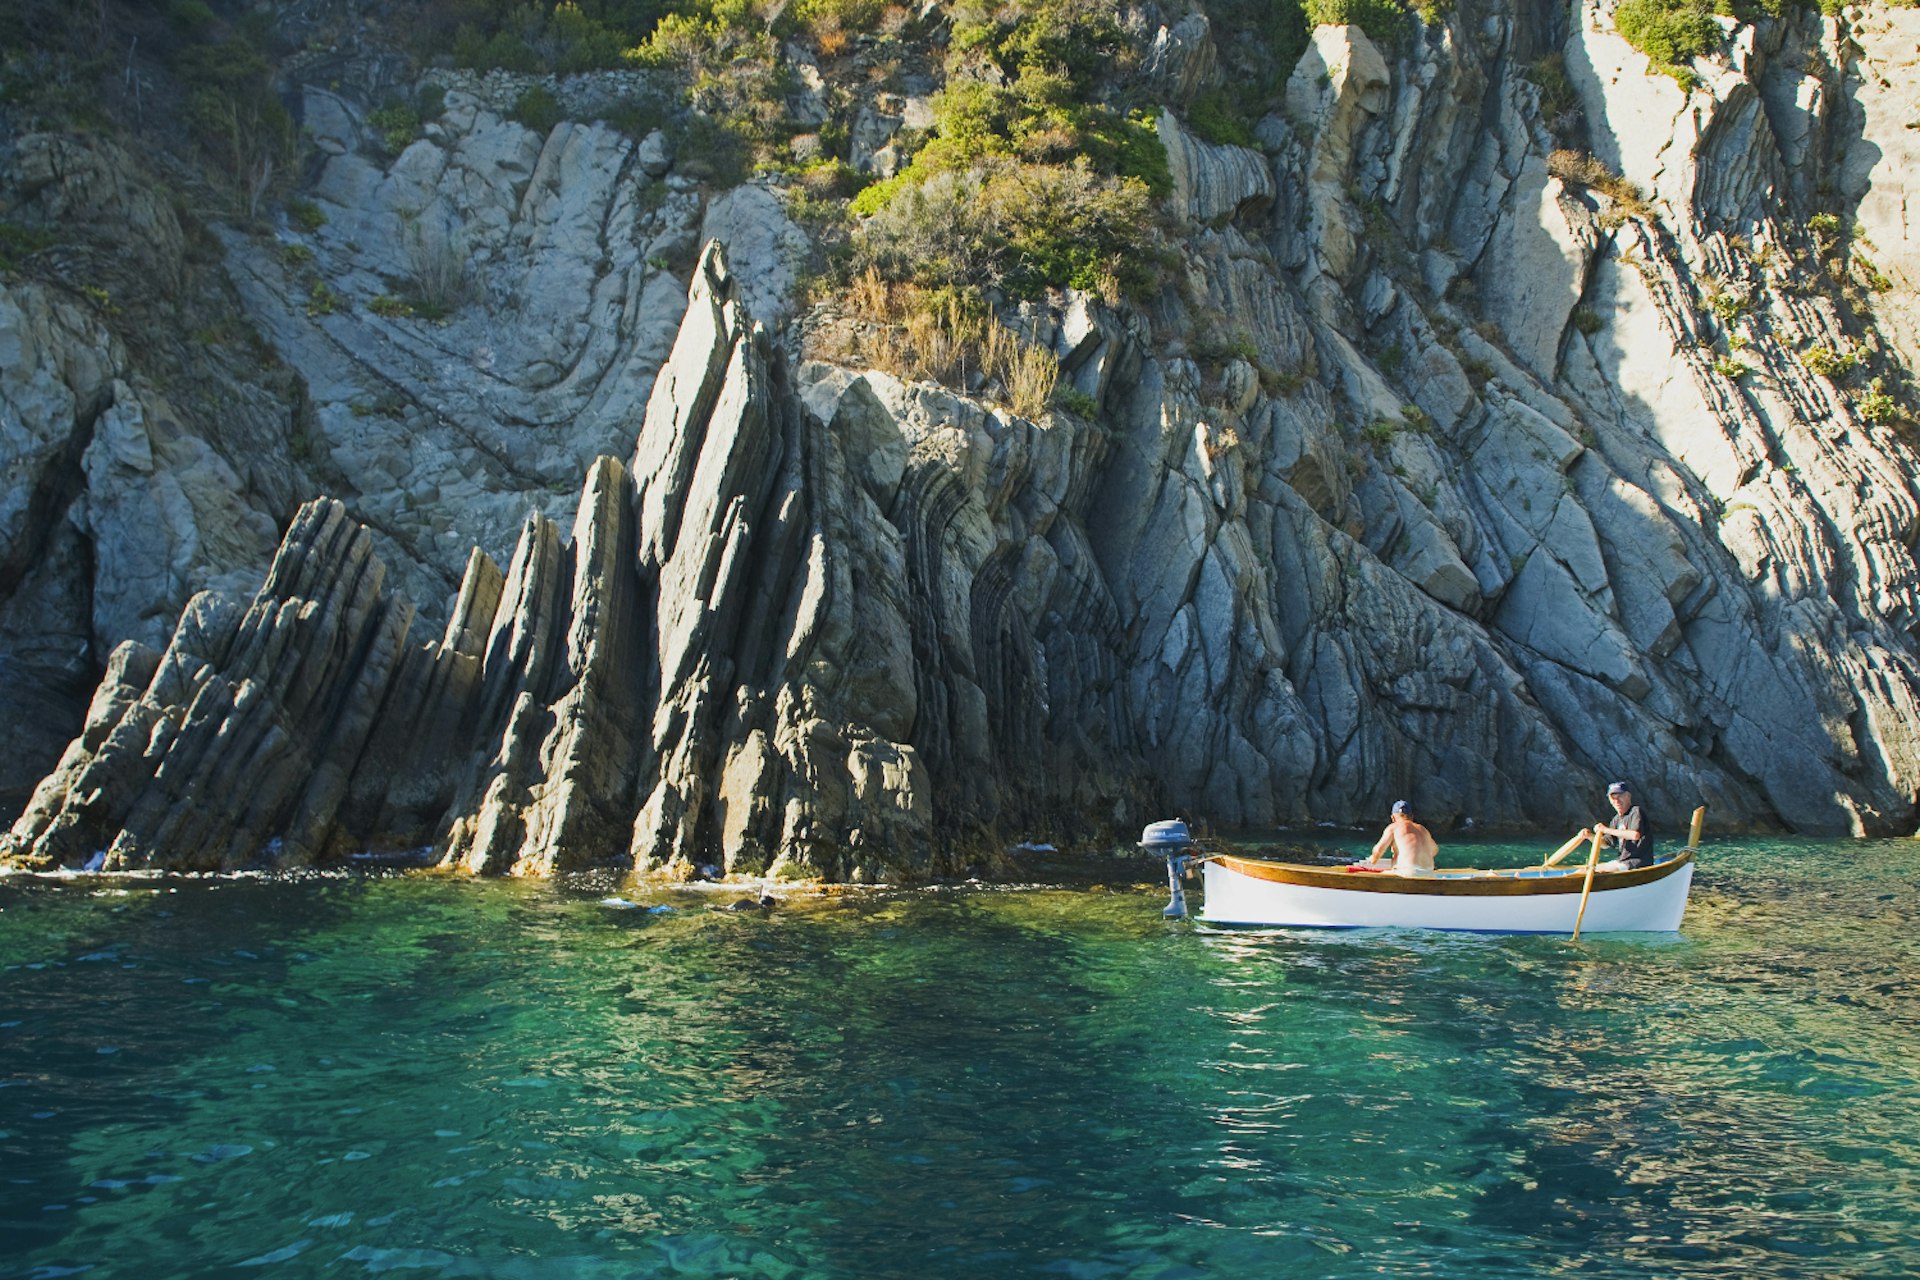 Two people sit in a small motorized canoe against a backdrop of craggy cliffs near the Cinque Terre, Italy